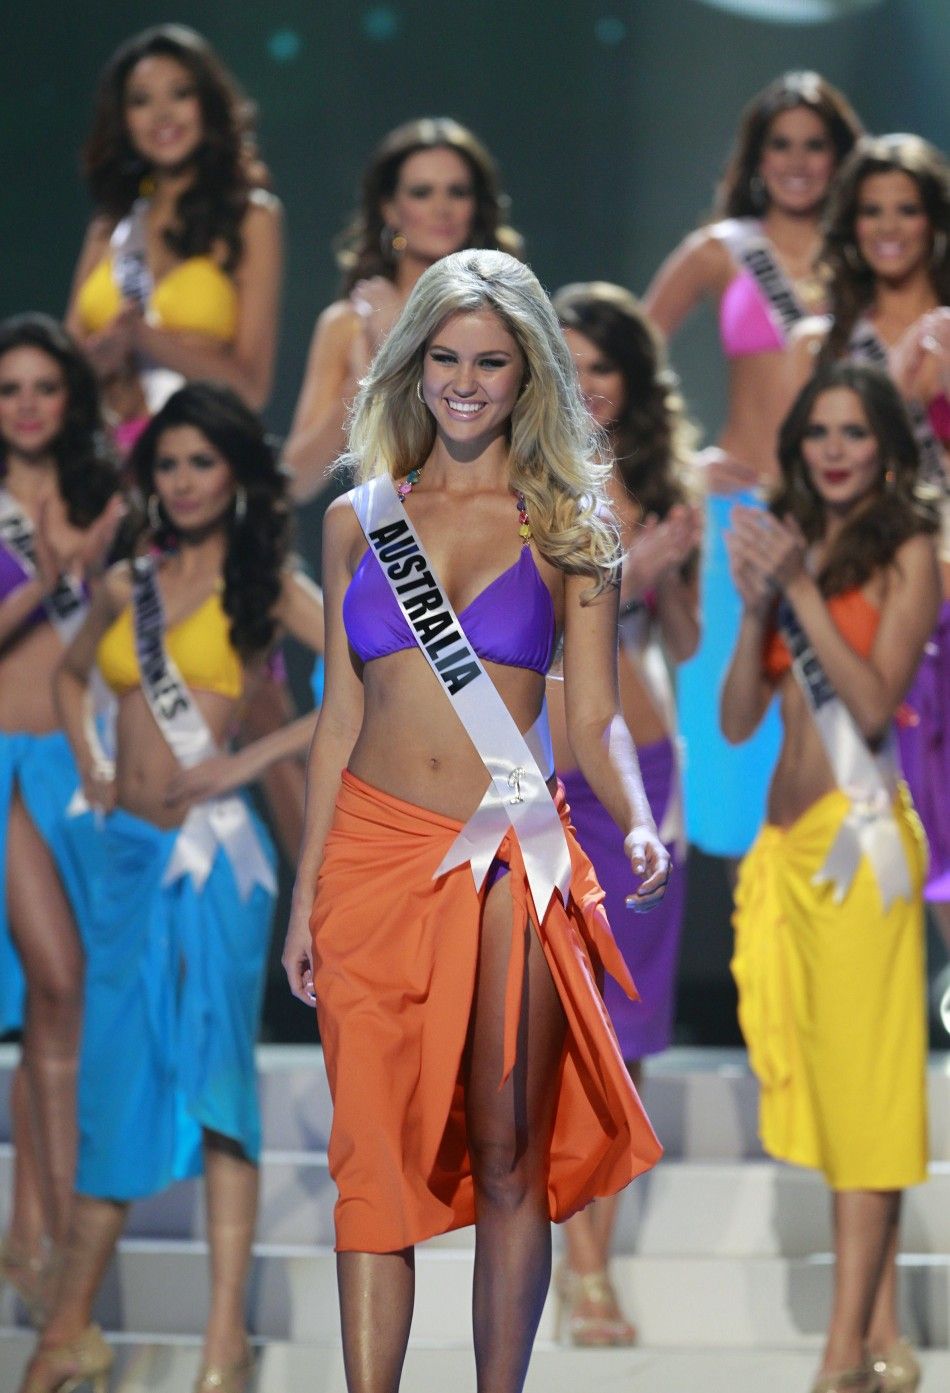 Miss Australia Sherri-lee Biggs steps forward after being chosen among the final ten contestants of the Miss Universe 2011 pageant in Sao Paulo